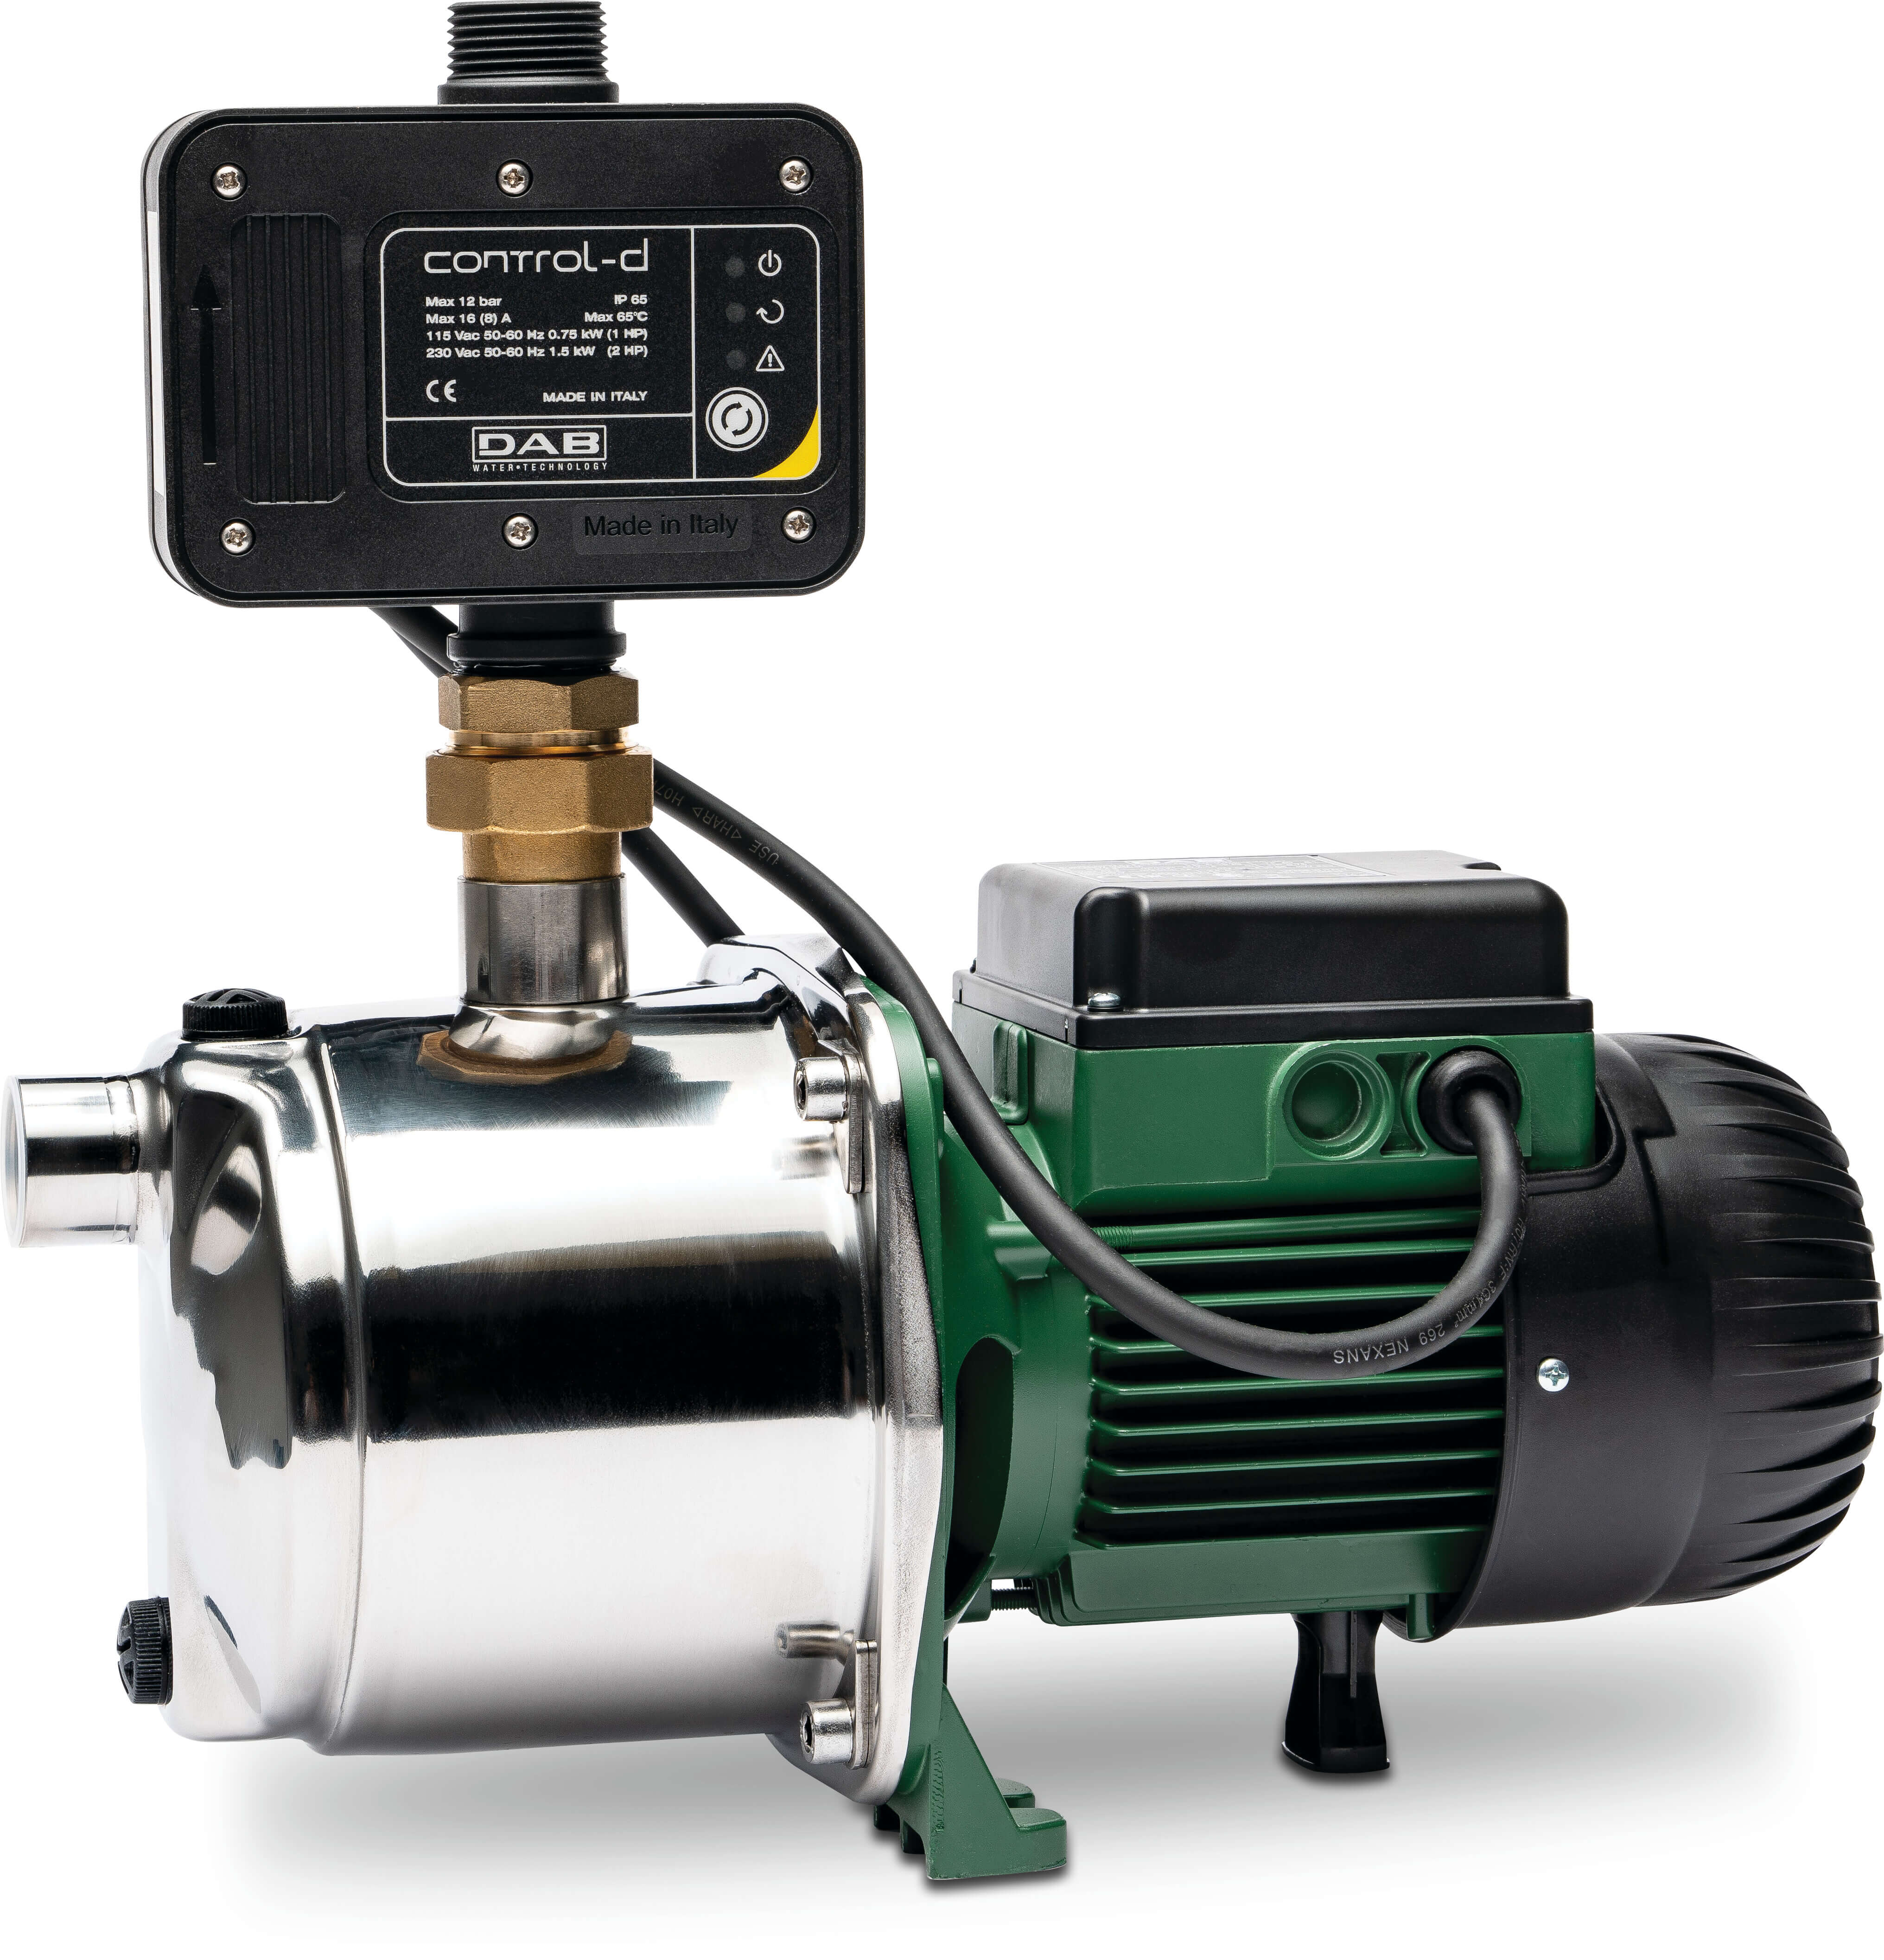 DAB Multi-stage centrifugal pump stainless steel 304 1" female thread x male thread 230VAC green self priming with press control type EUROINOX 30/50 Control D